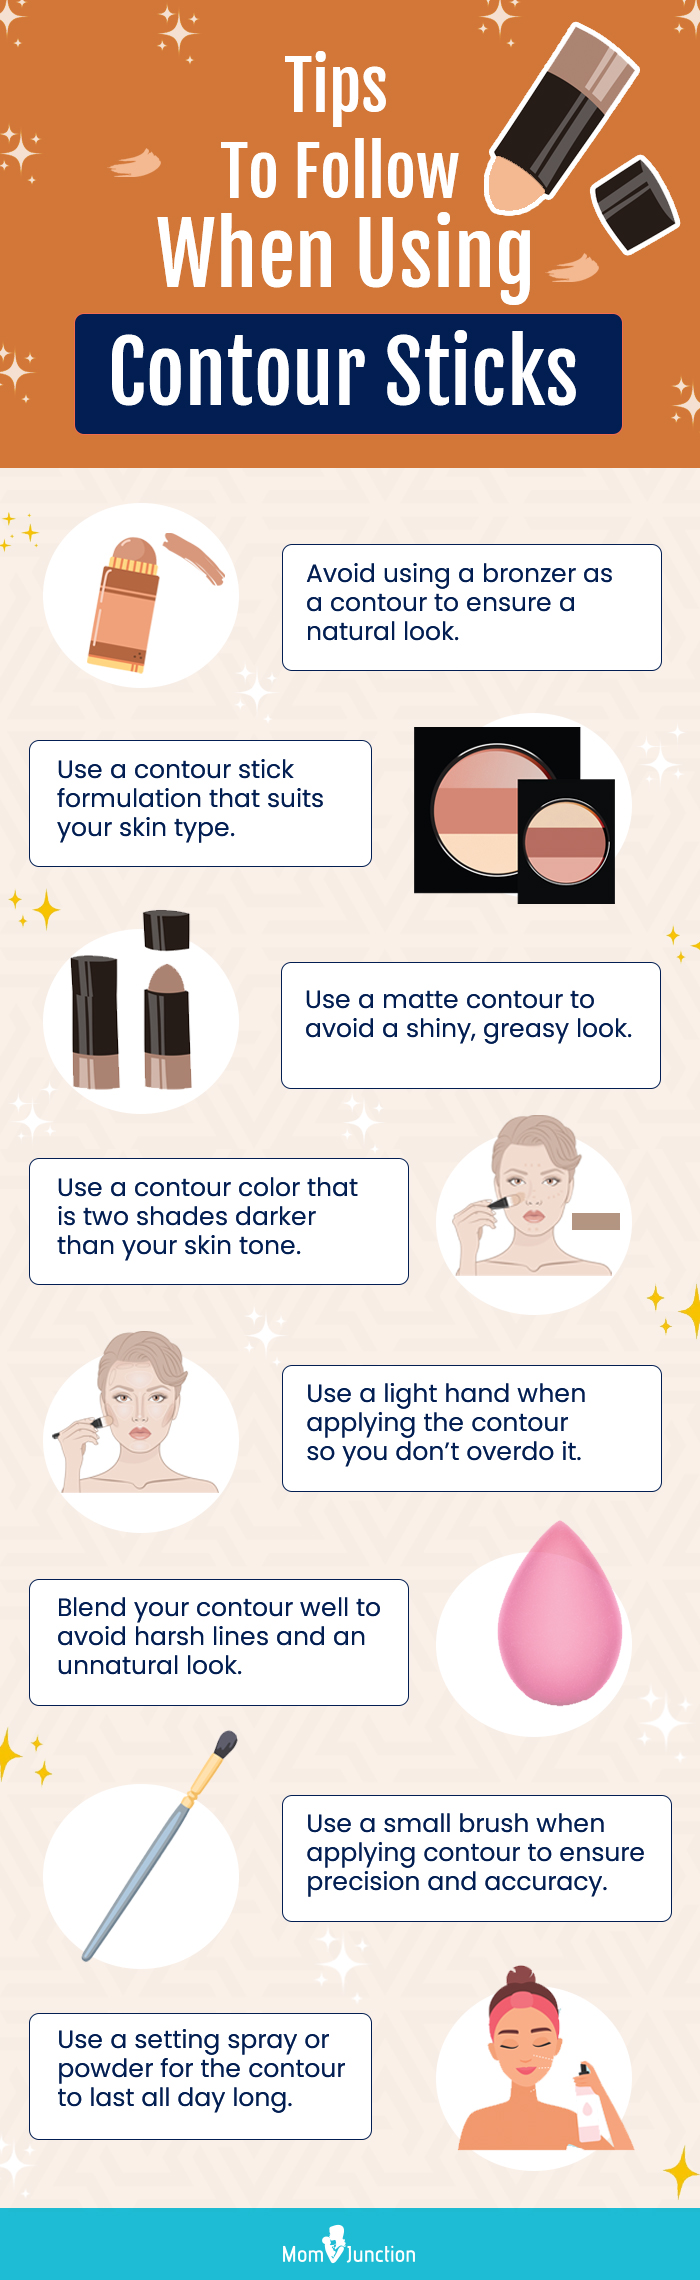 Tips To Follow When Using Contour Sticks (infographic)